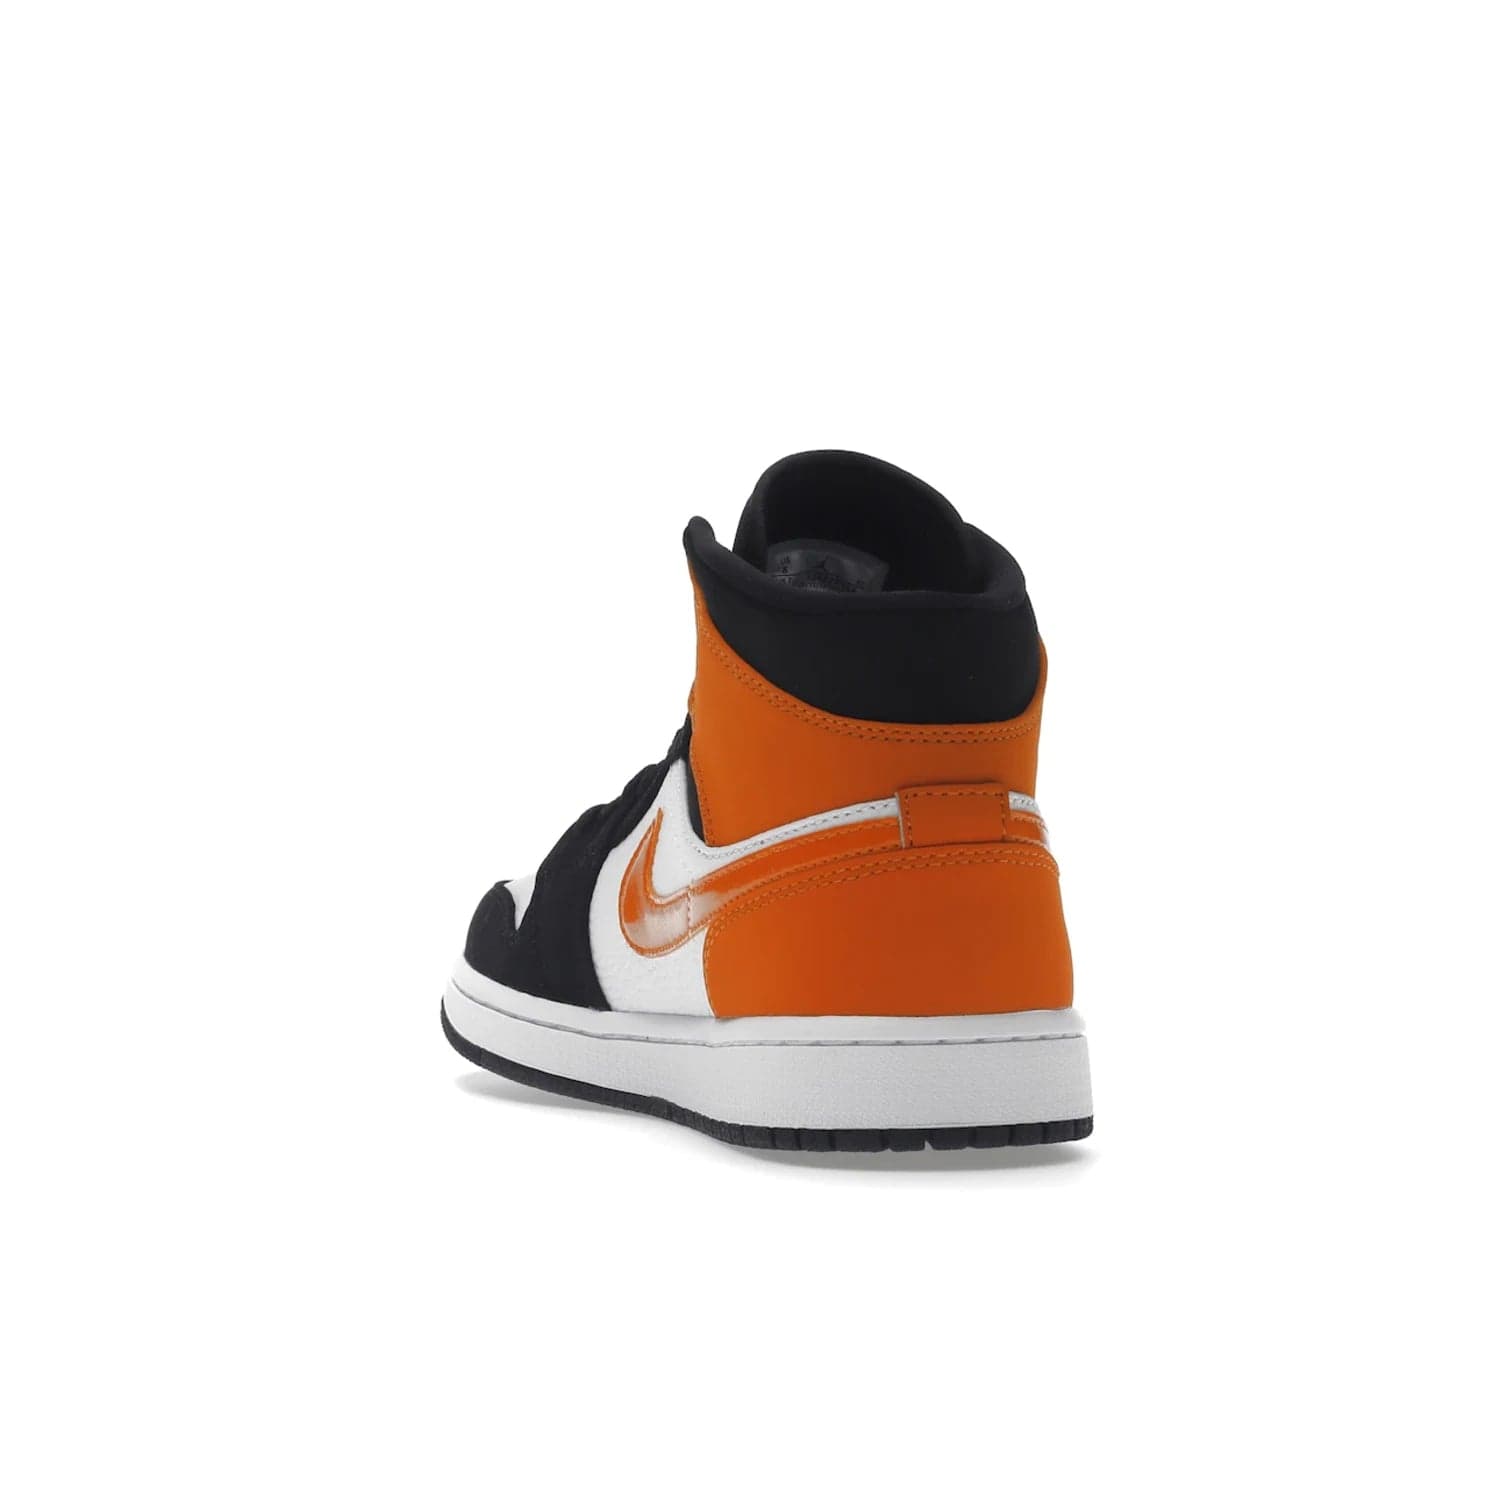 Jordan 1 Mid Shattered Backboard - Image 26 - Only at www.BallersClubKickz.com - The Air Jordan 1 Mid Shattered Backboard offers a timeless Black/White-Starfish colorway. Classic Swoosh logo and AJ insignia plus a shatterd backboard graphic on the insole. Get your pair today!